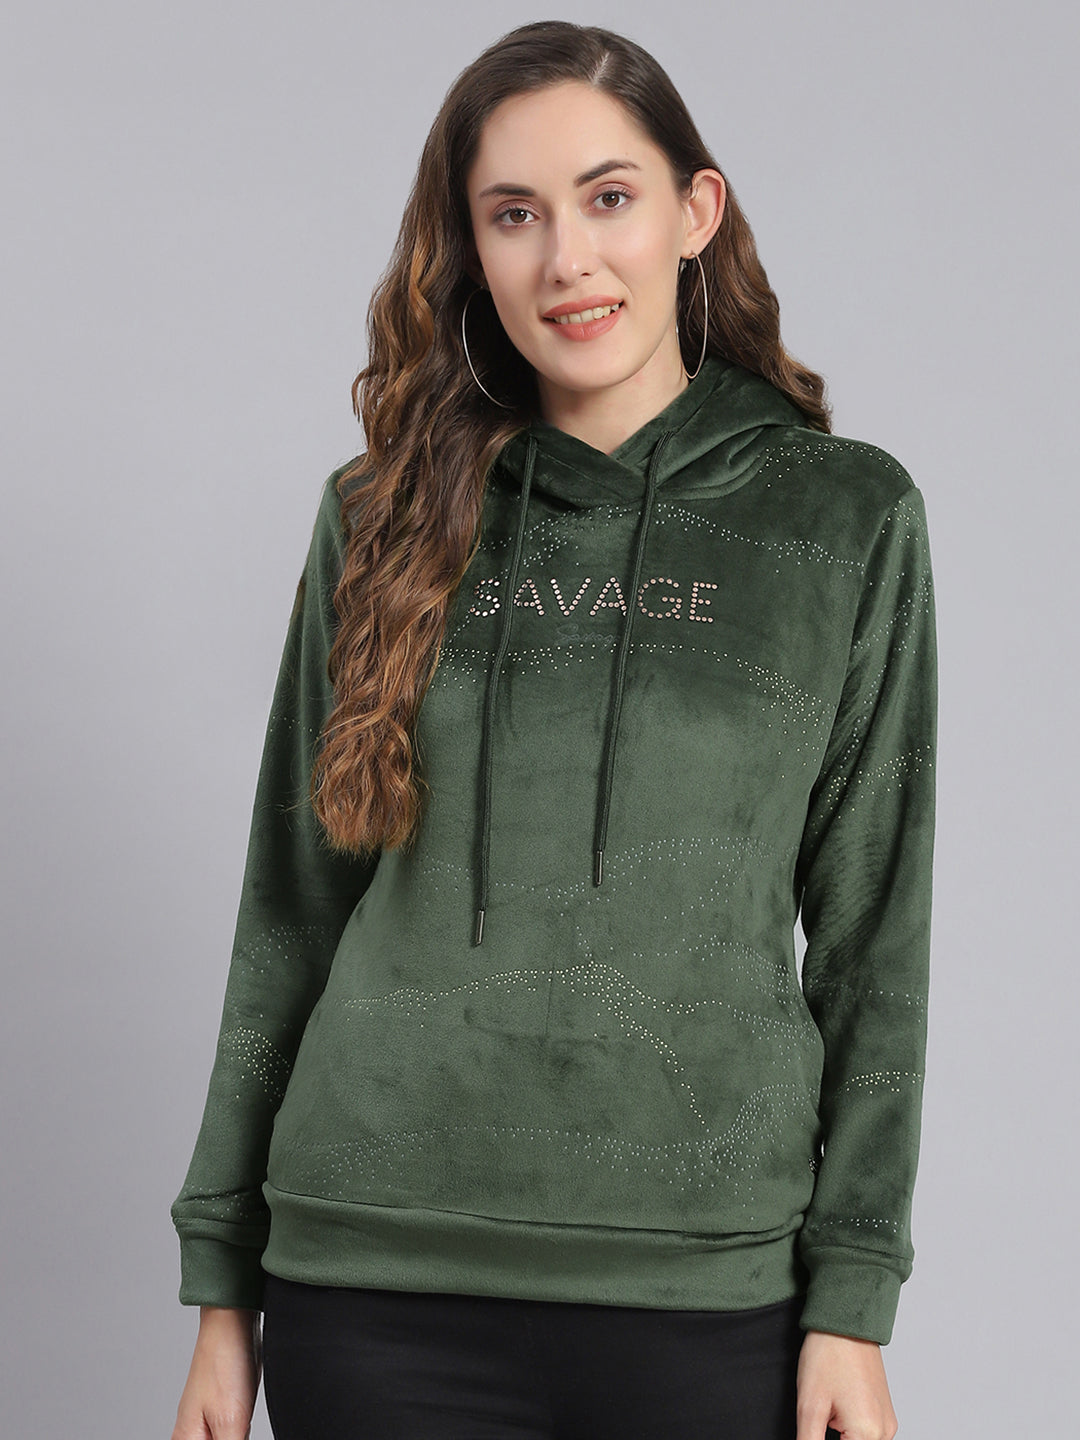 Buy Hooded Sweatshirts For Women Online in India - Monte Carlo – Page 3